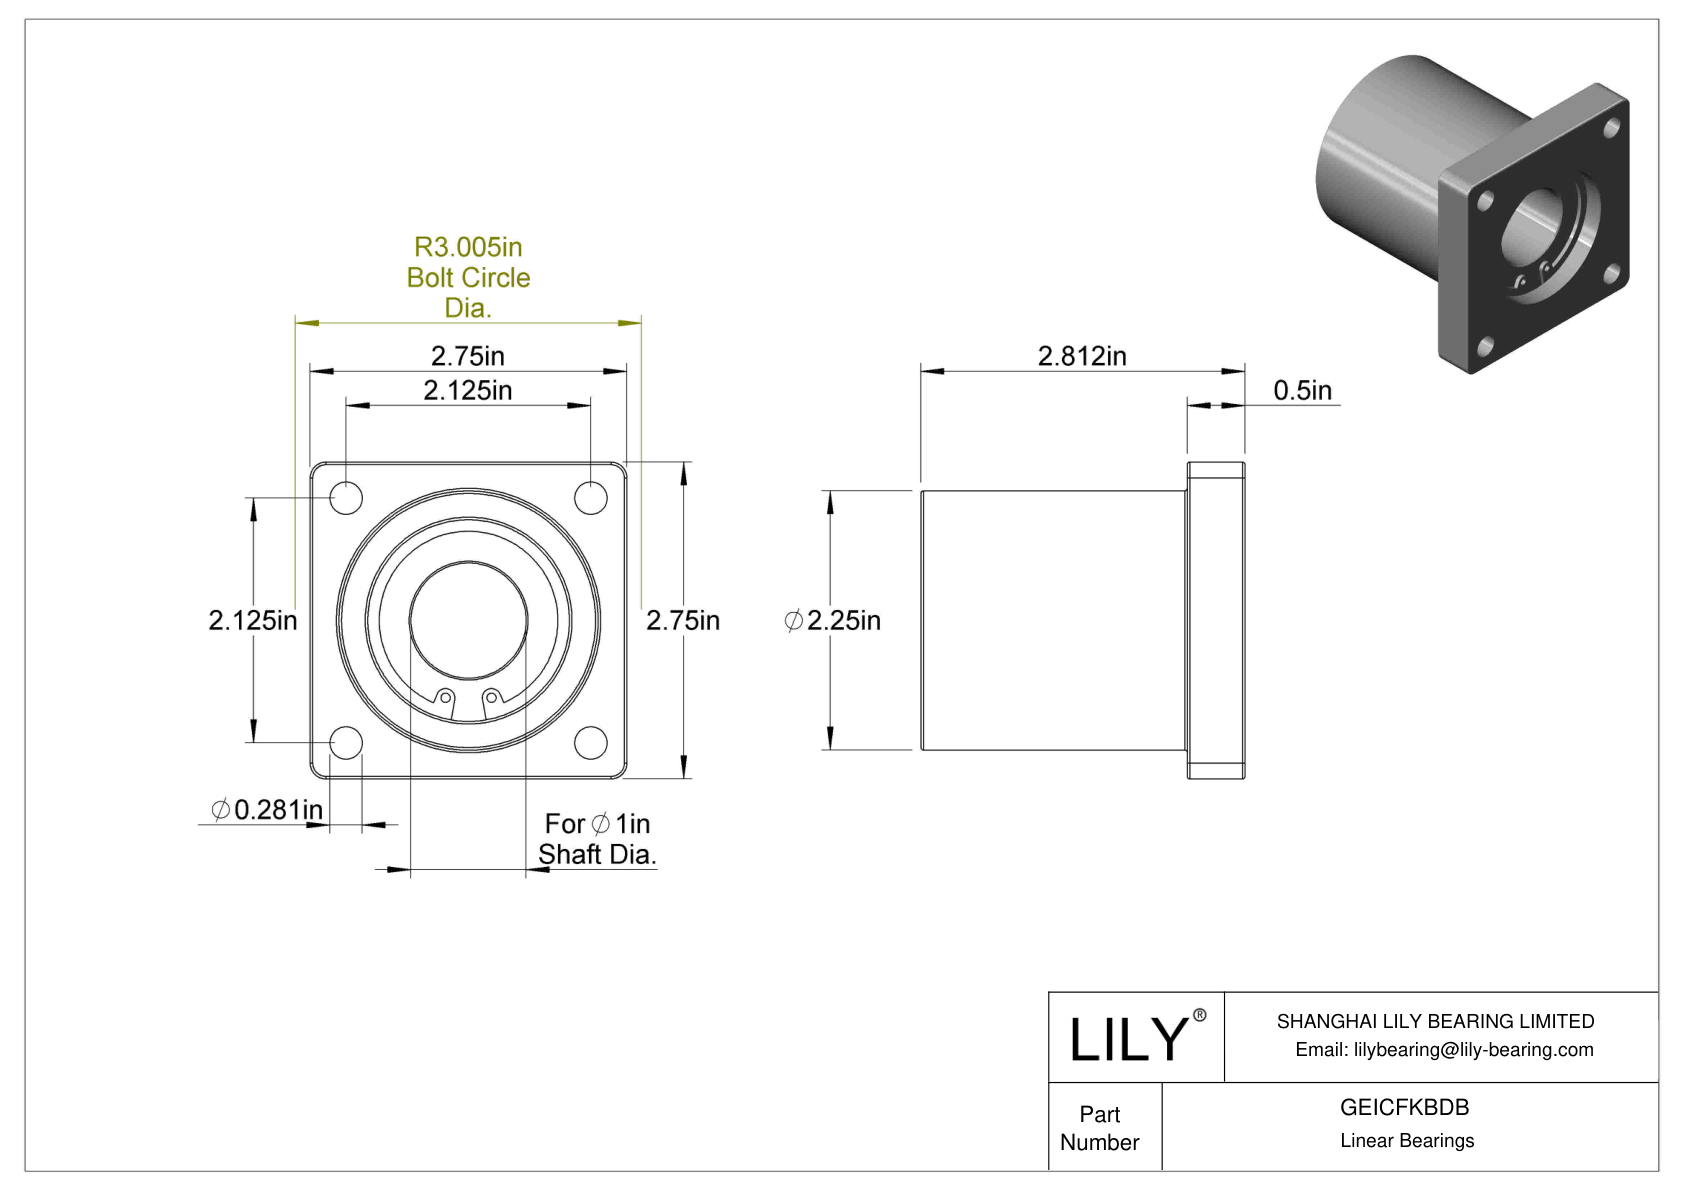 GEICFKBDB Chemical-Resistant Flange-Mounted Linear Sleeve Bearings cad drawing